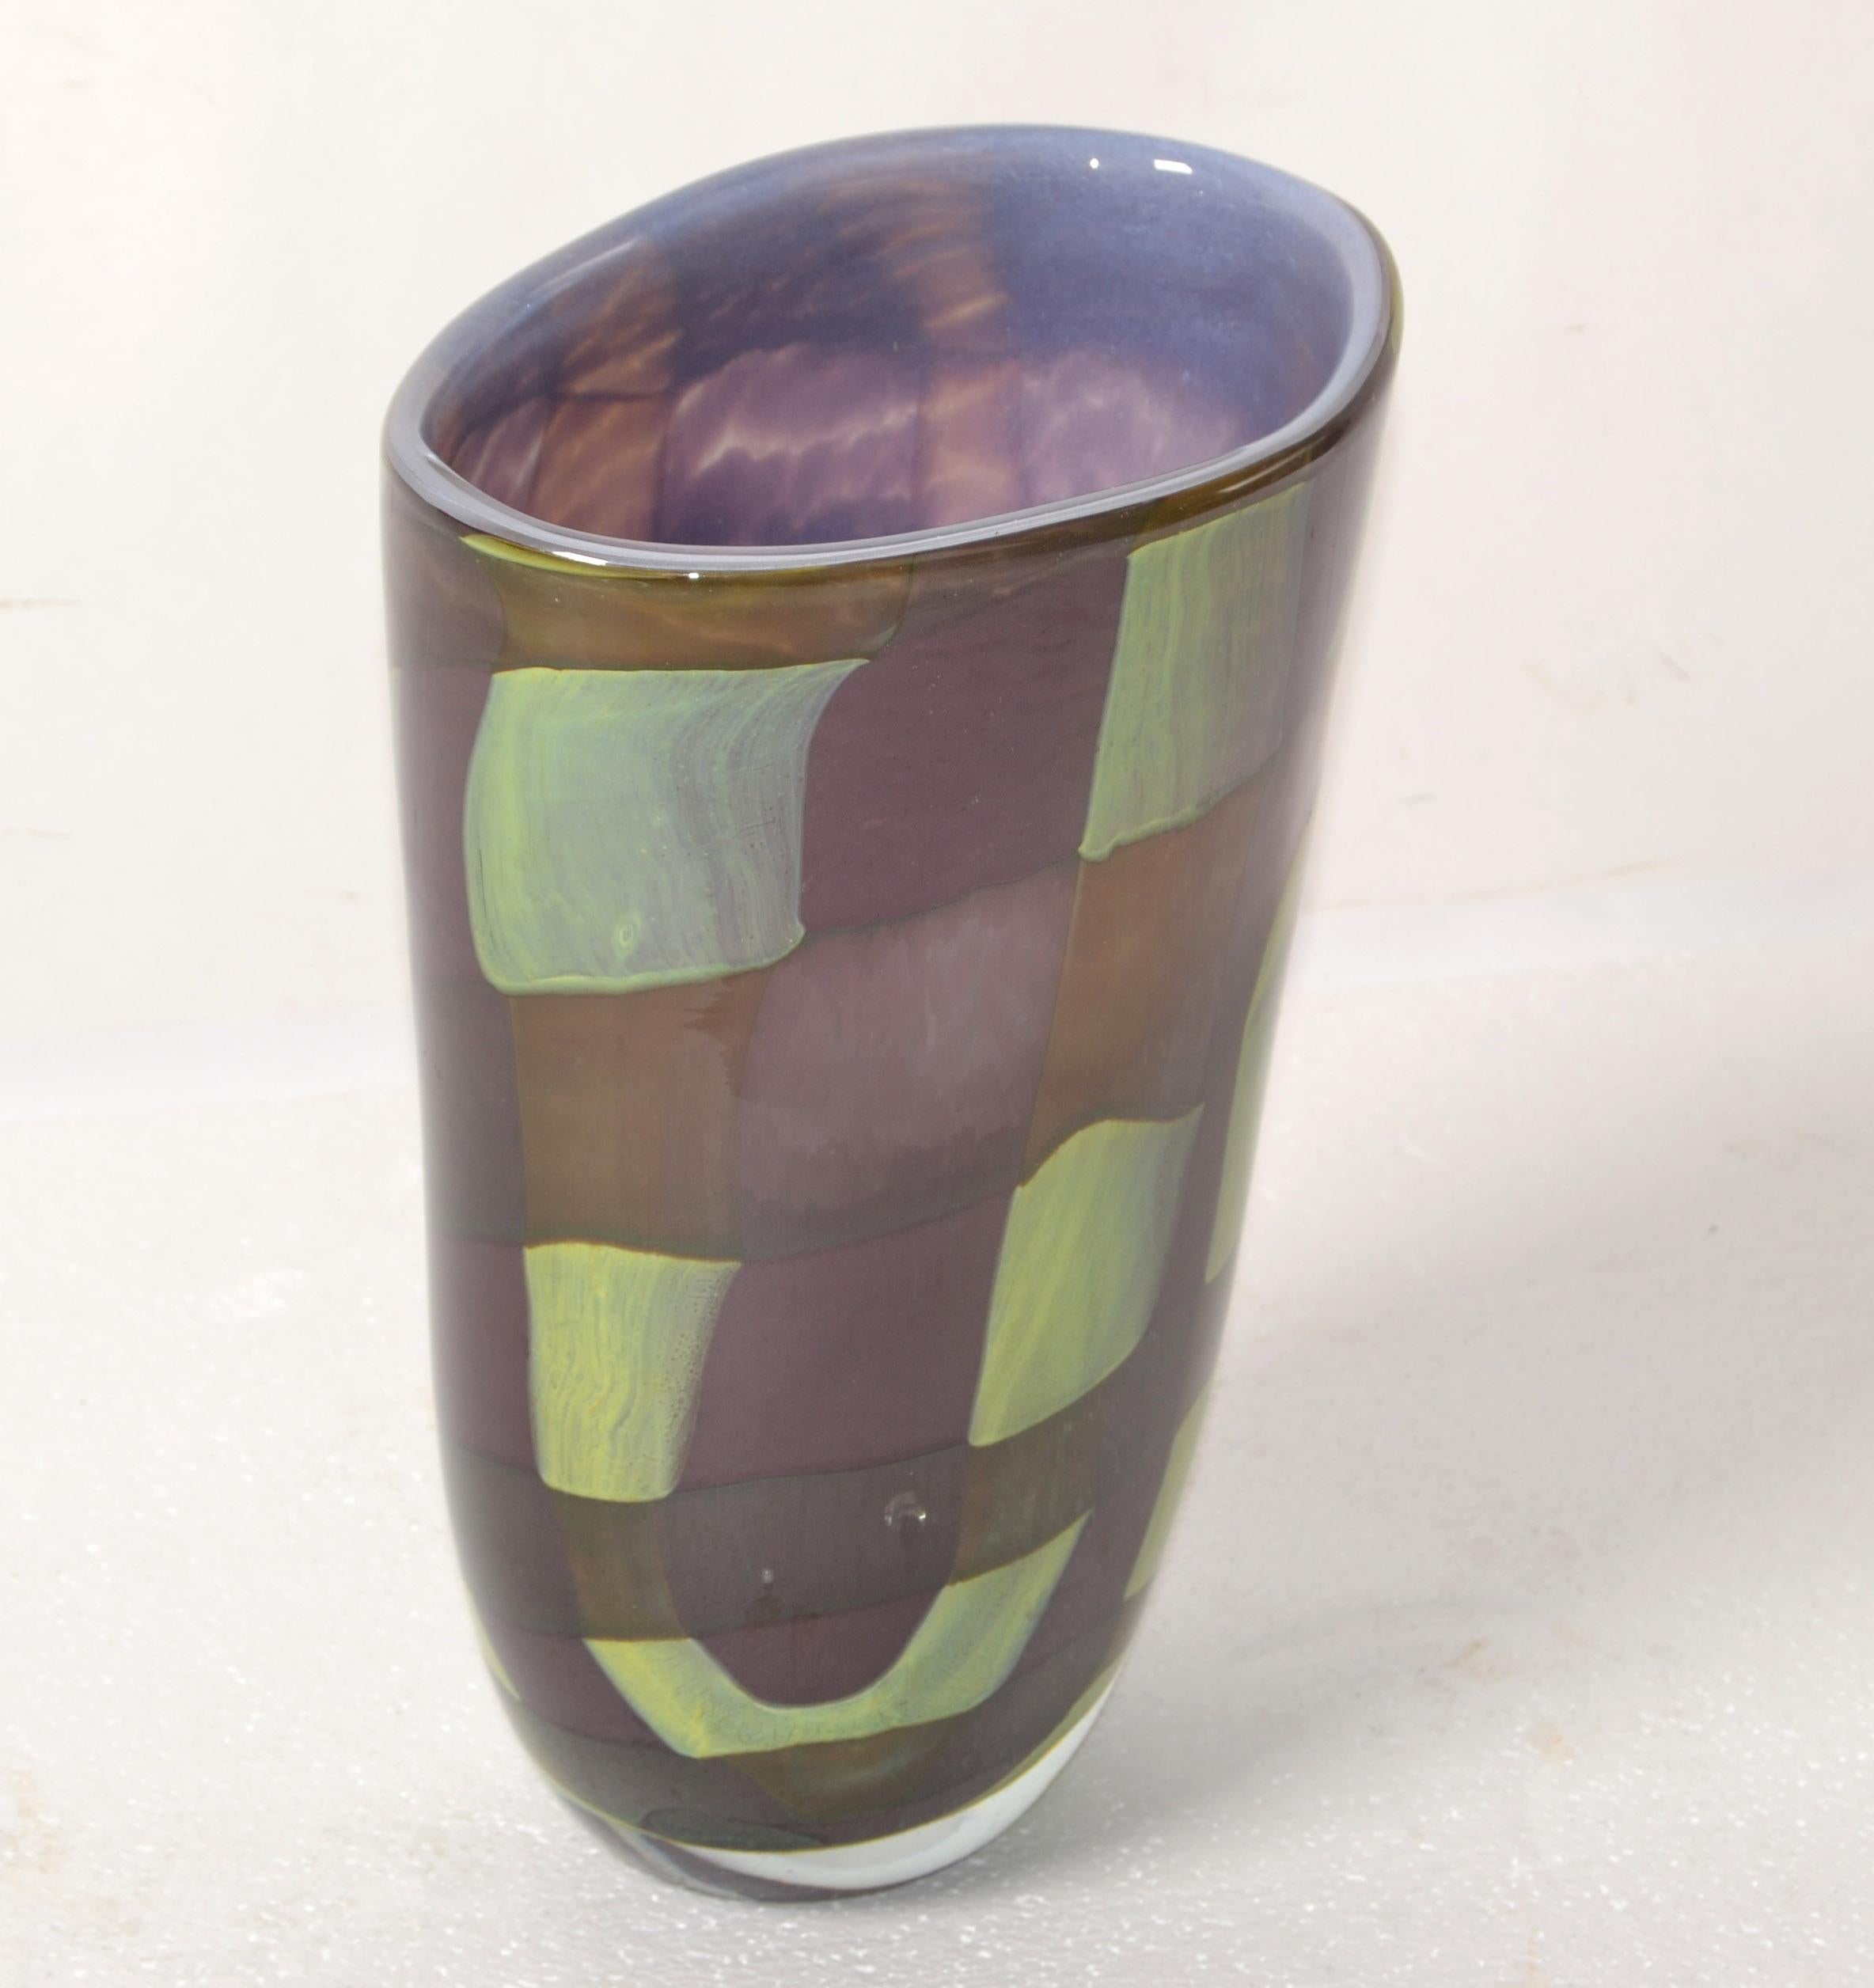 Sasaki Sengai oval encased Art Glass flower vase in Purple and hue of olive green and the light blue interior.
Minimalism Cubism Style Pattern and a very heavy Vessel, Centerpiece or Flower Vase.
Signed by Artist at the base.
In good vintage